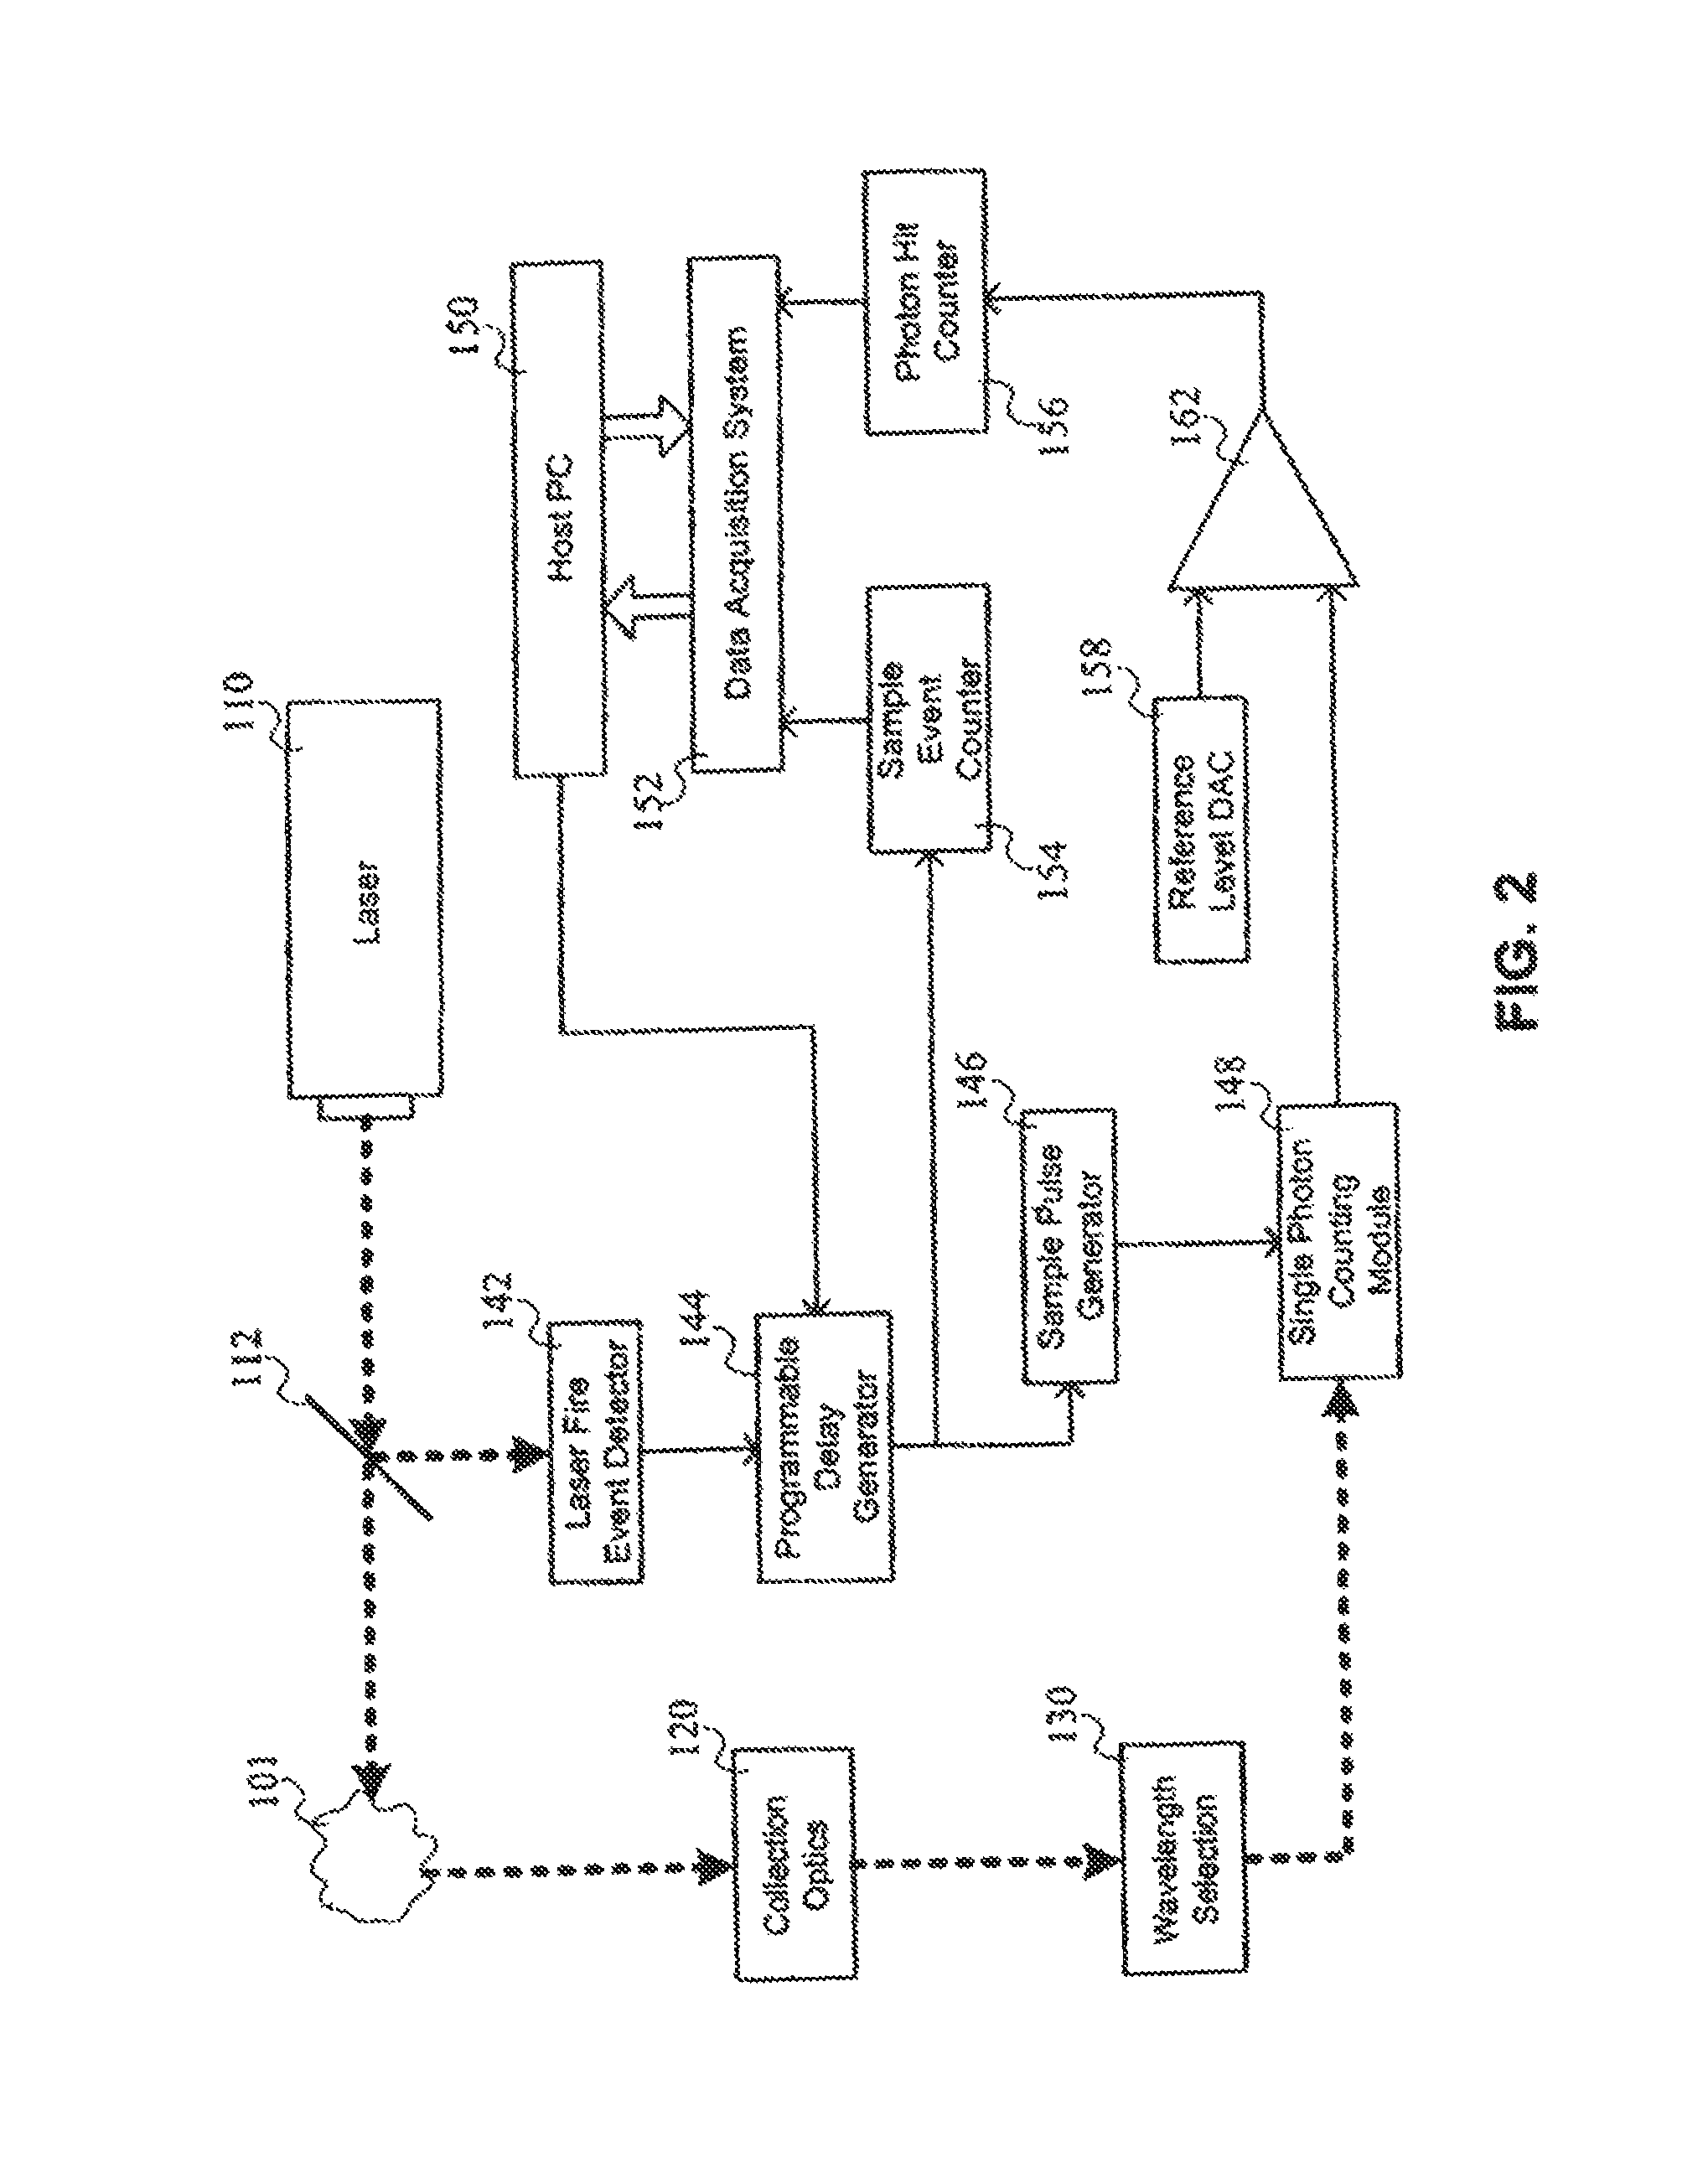 Time correlation system and method